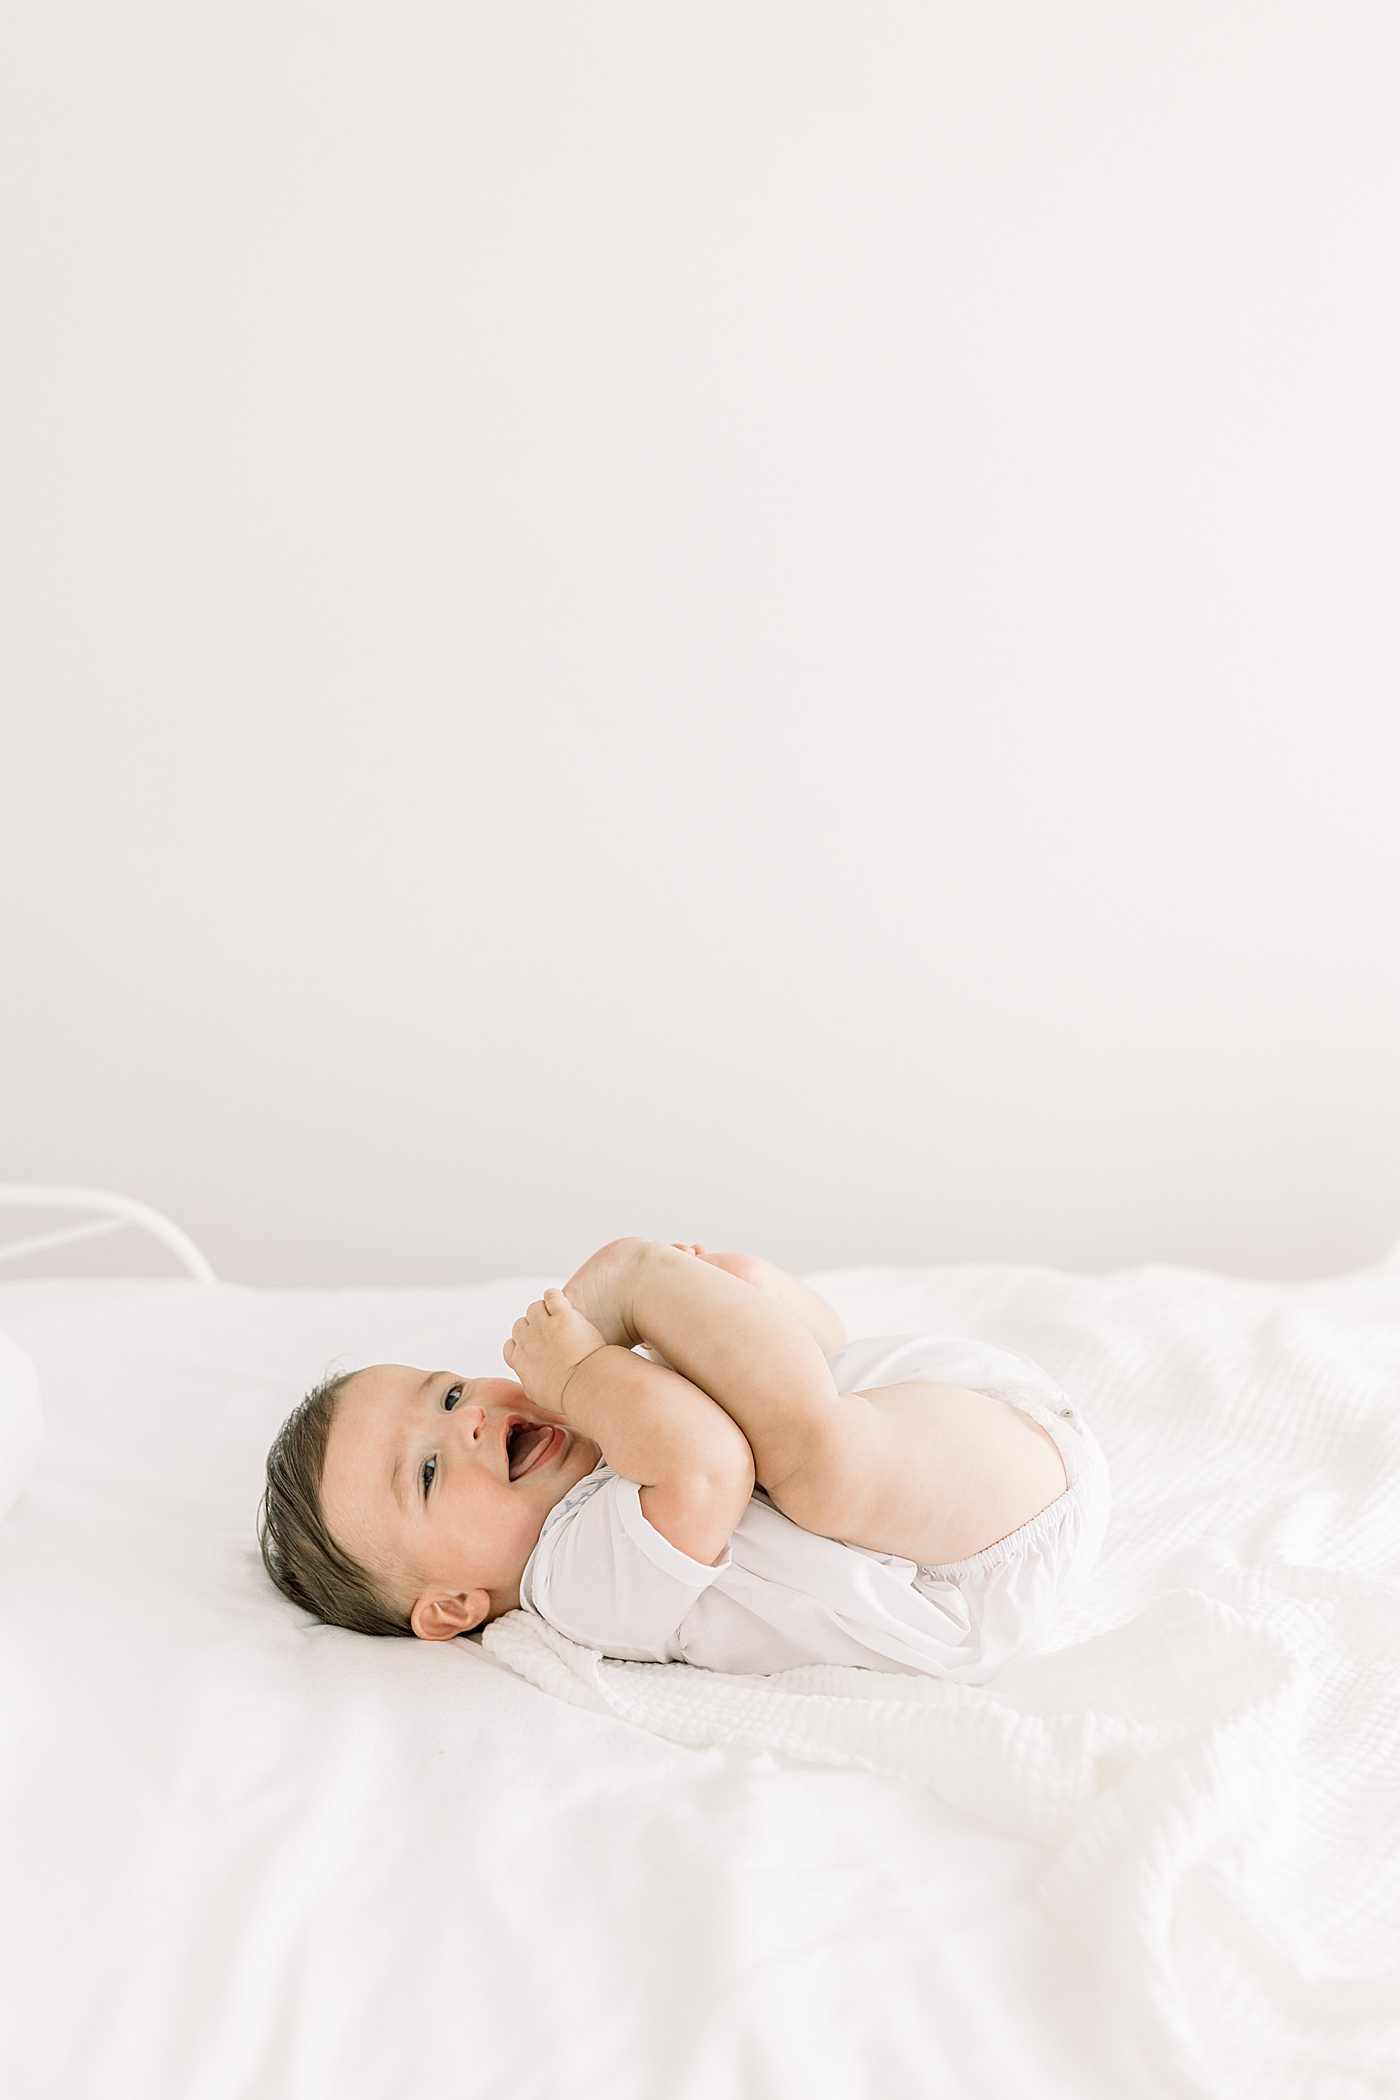 Baby smiling and laying on back, chewing on feet in a softly lit room | Images by Caitlyn Motycka